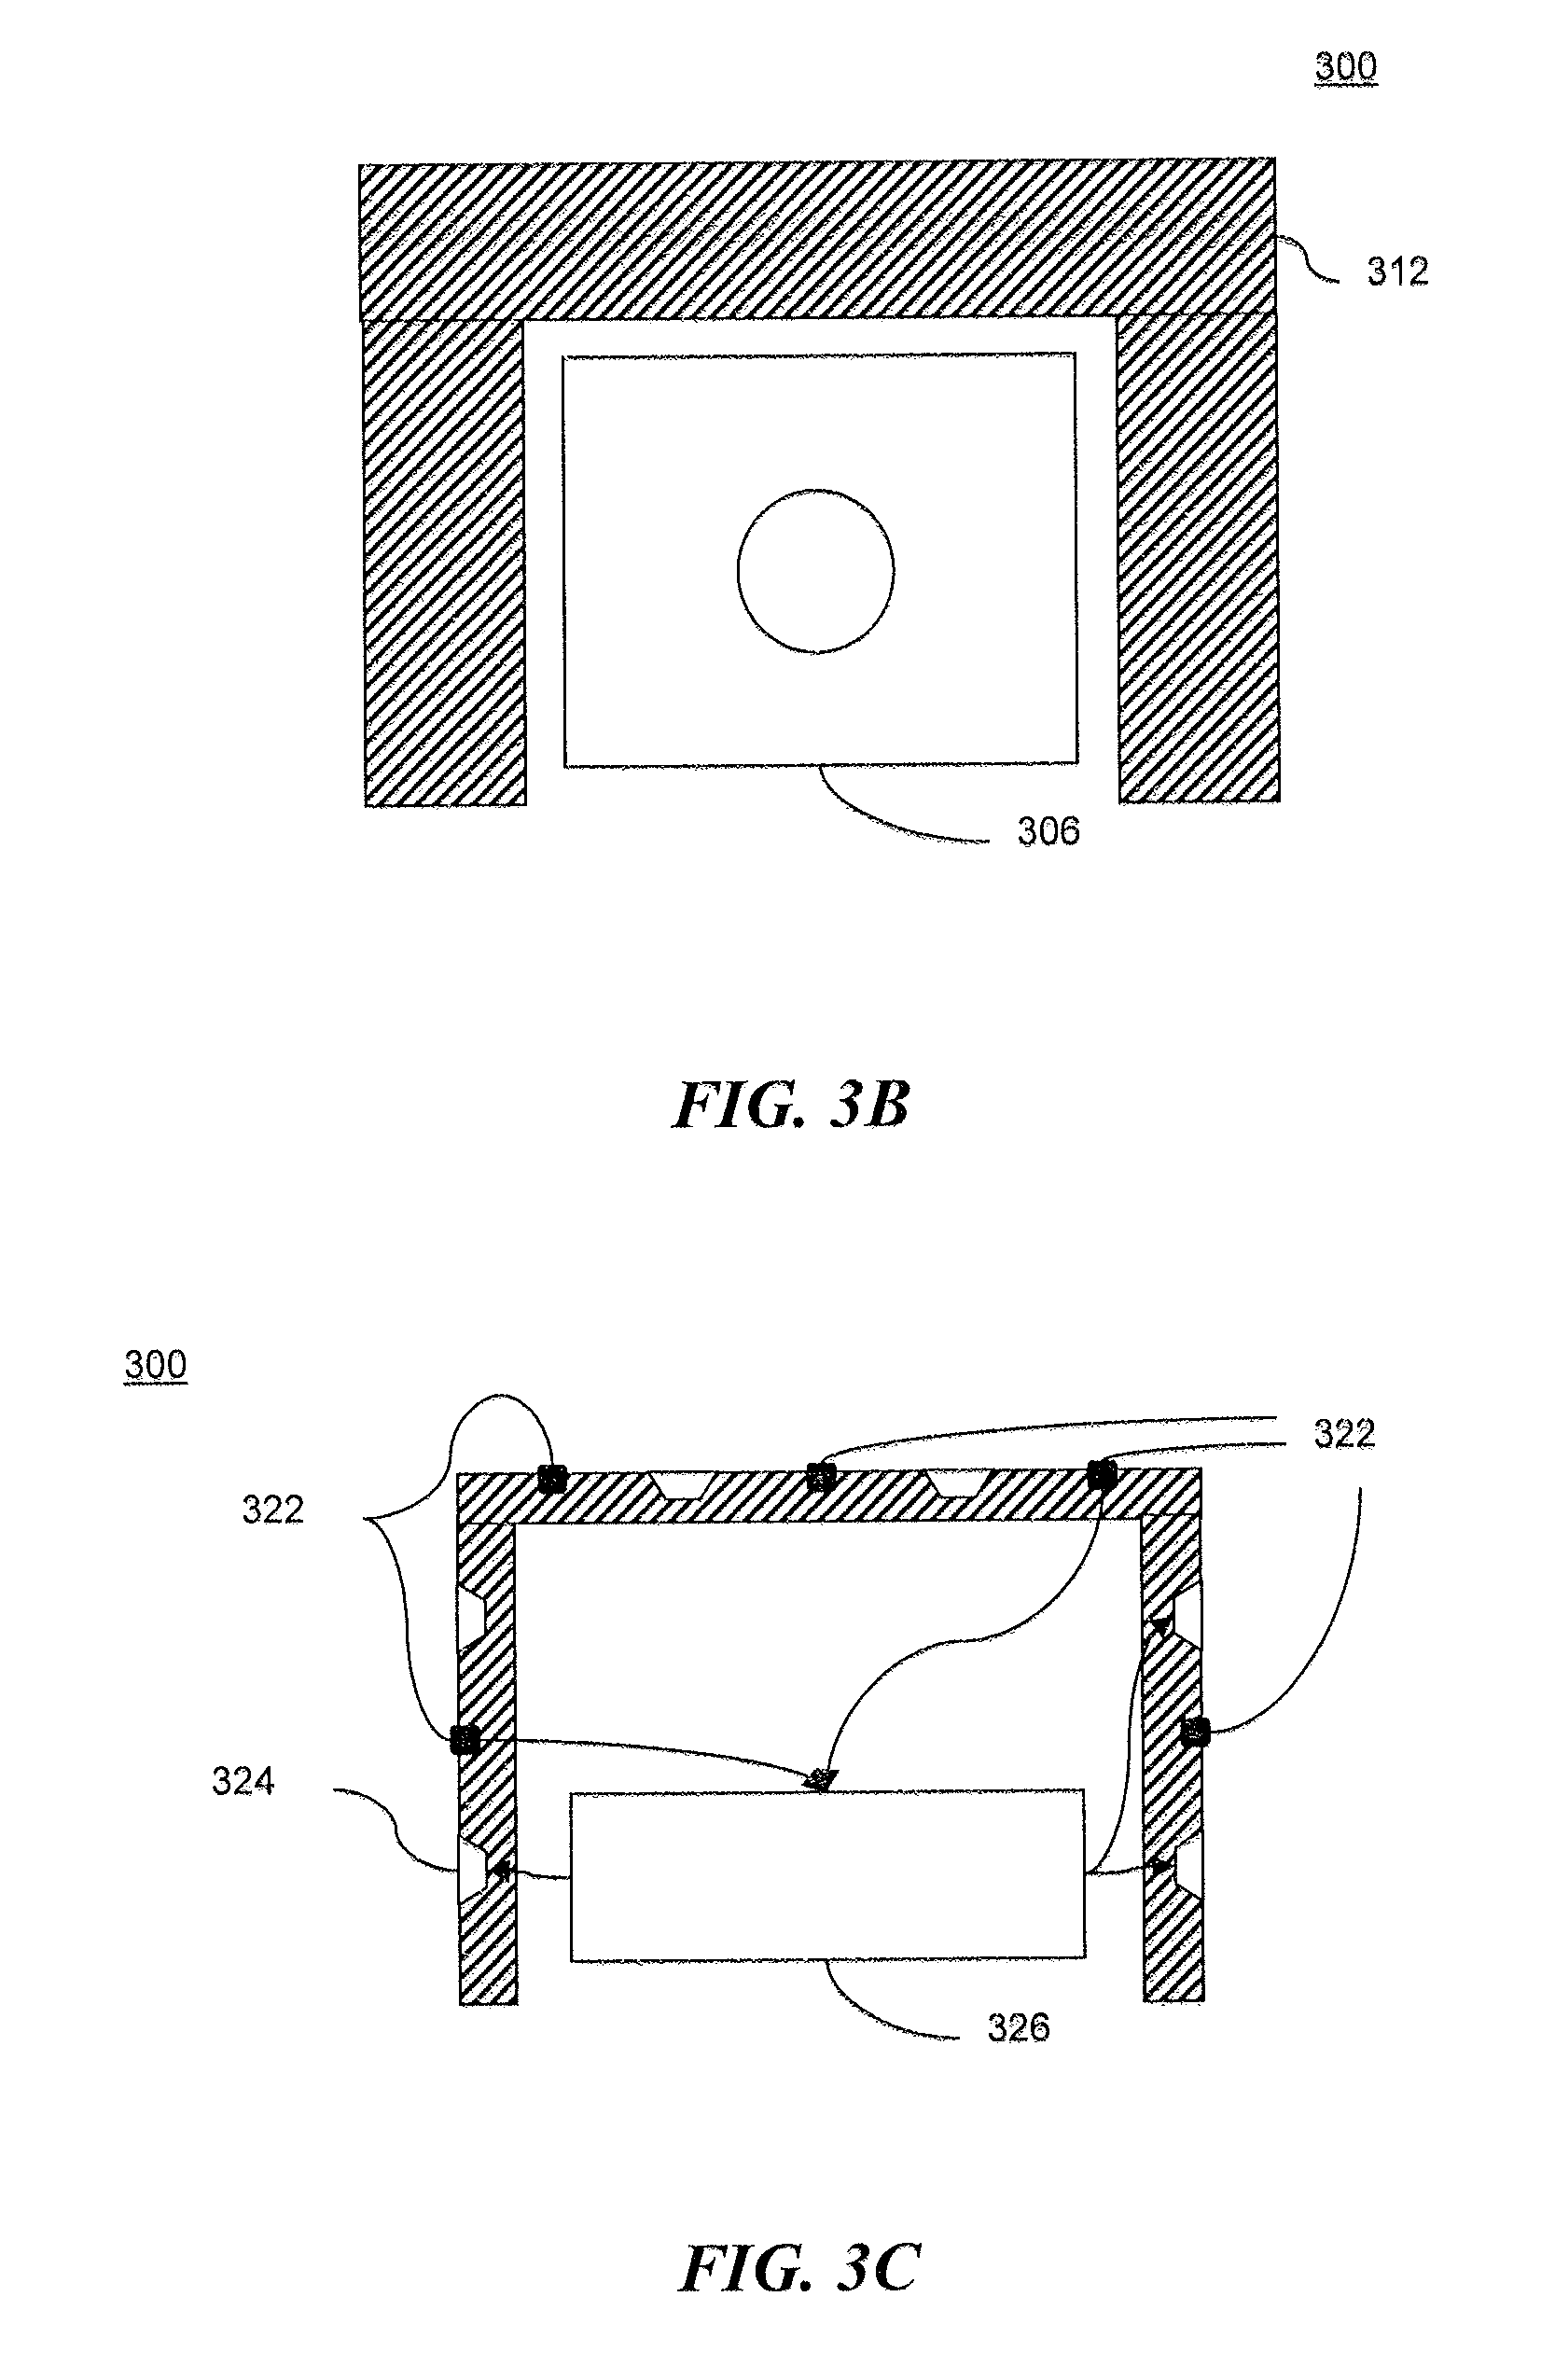 Service robot and method of operating same